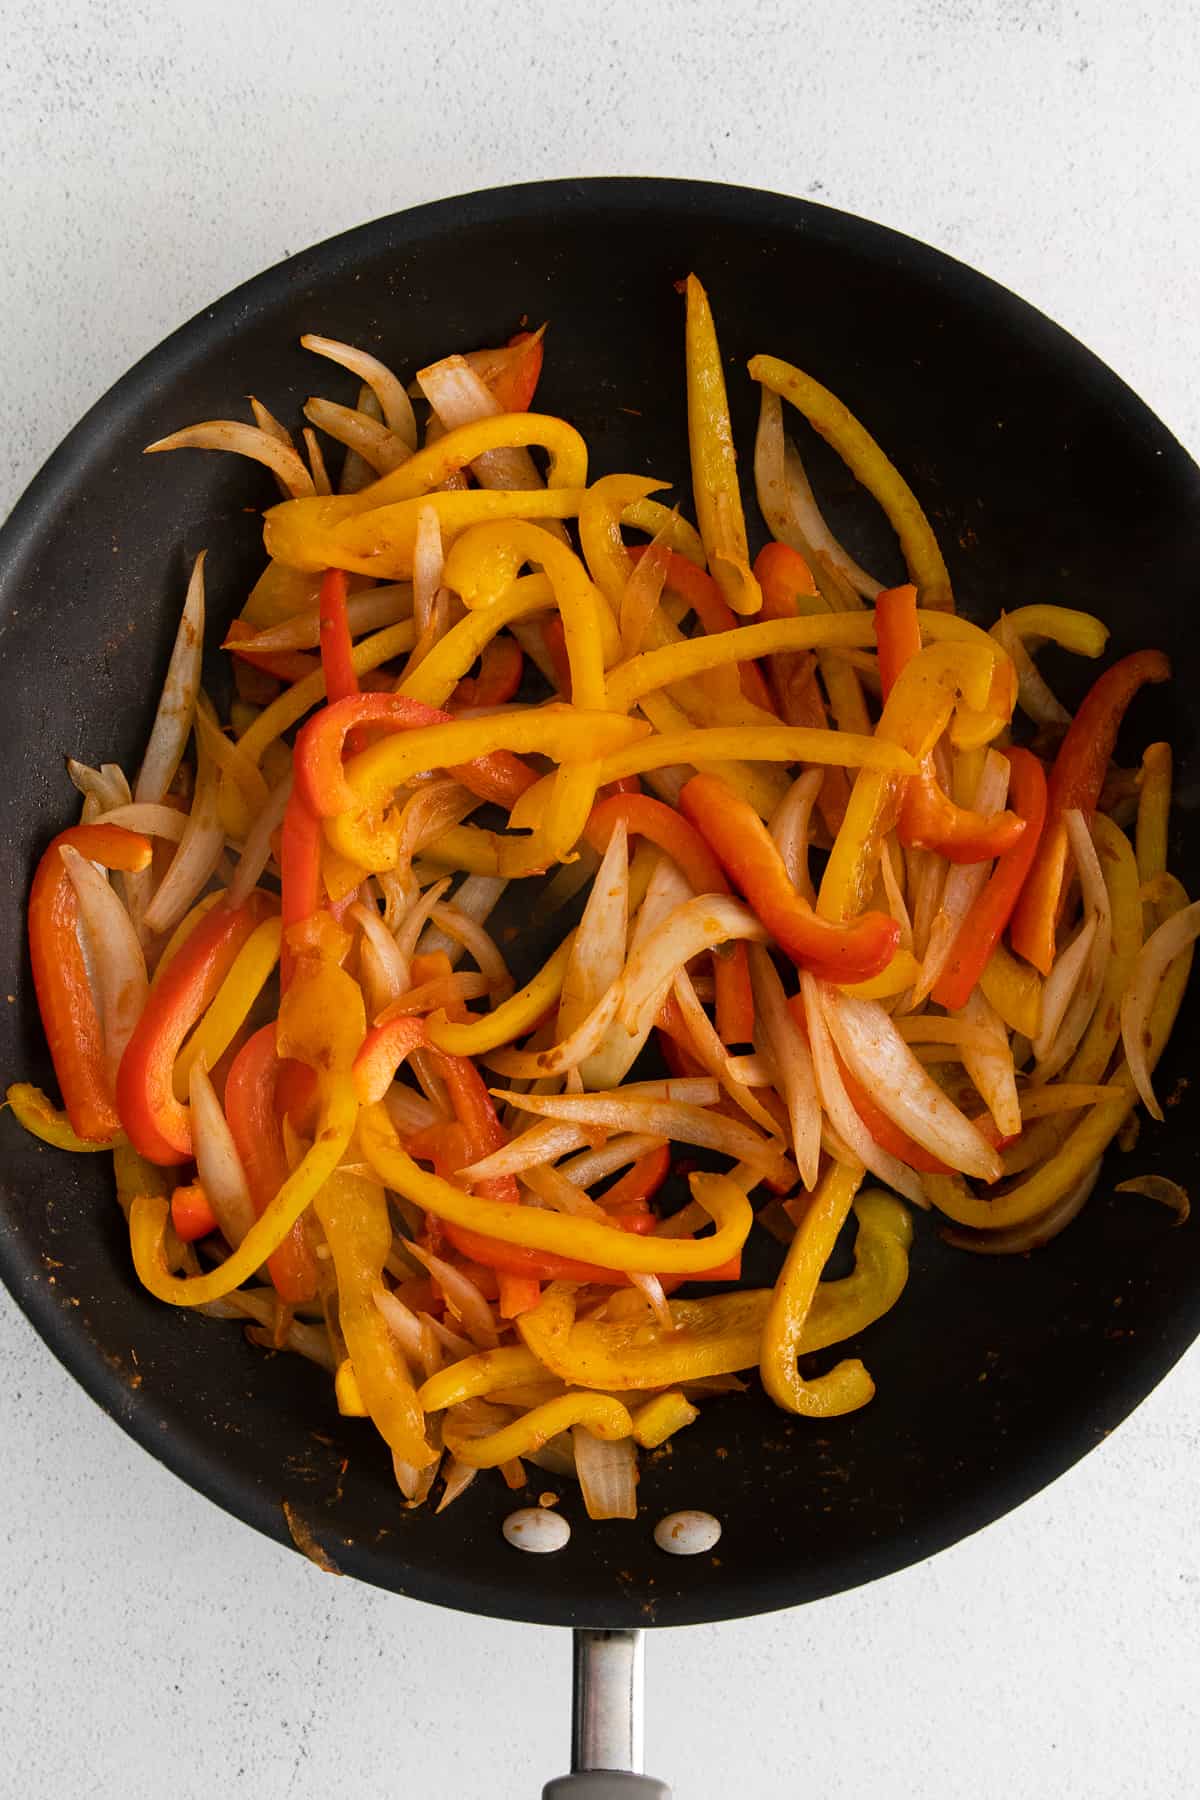 Sauteed onions and bell peppers in a skillet.